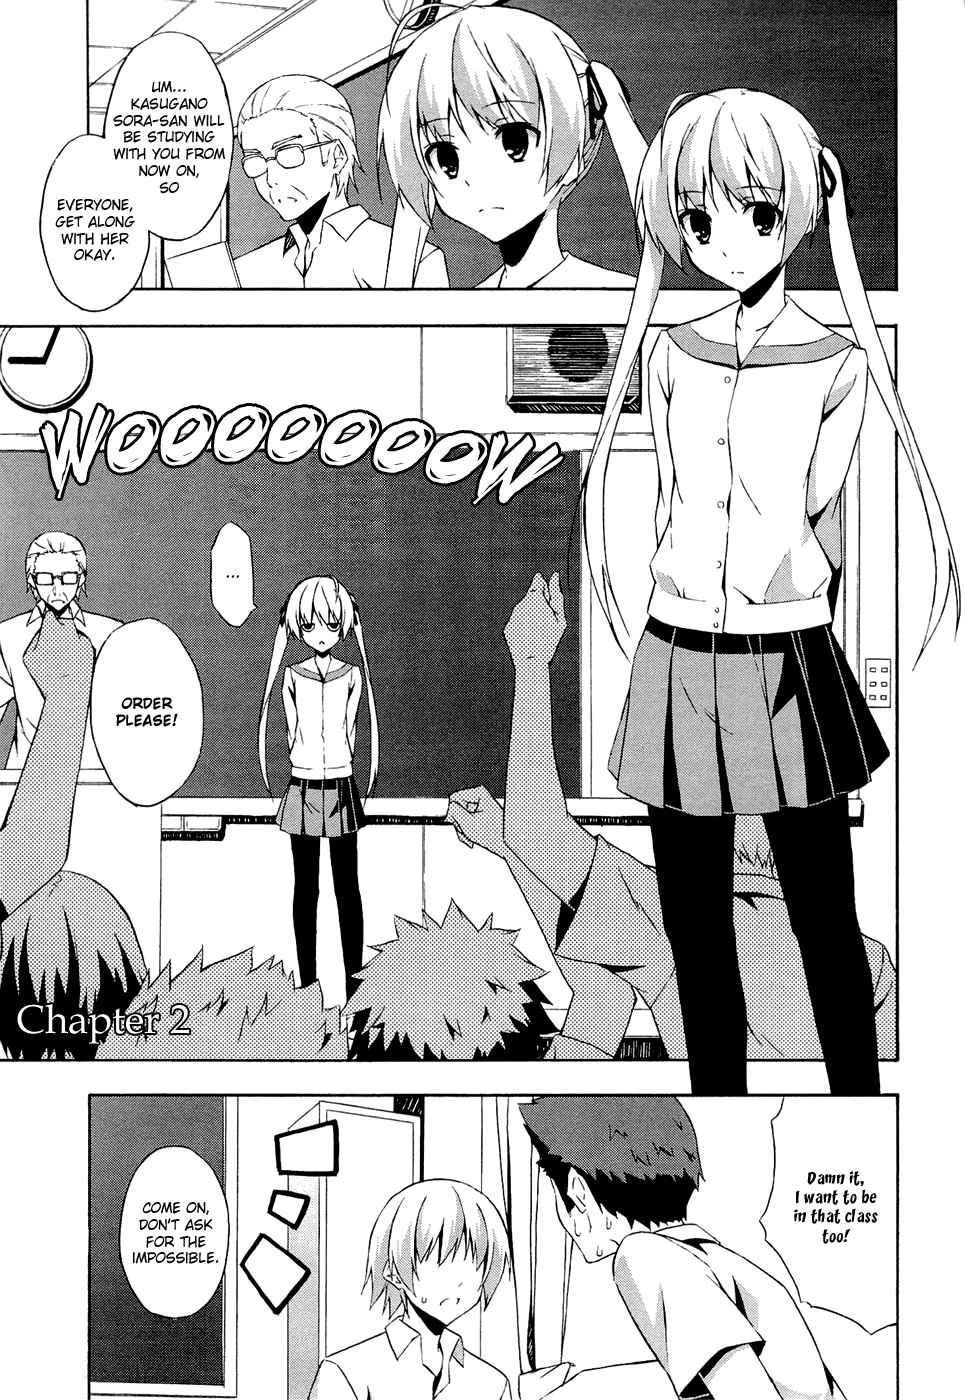 Yosuga no Sora In Solitude, Where We Are Least Alone. Vol. 1 Ch. 2 The Two People With Different Opinions